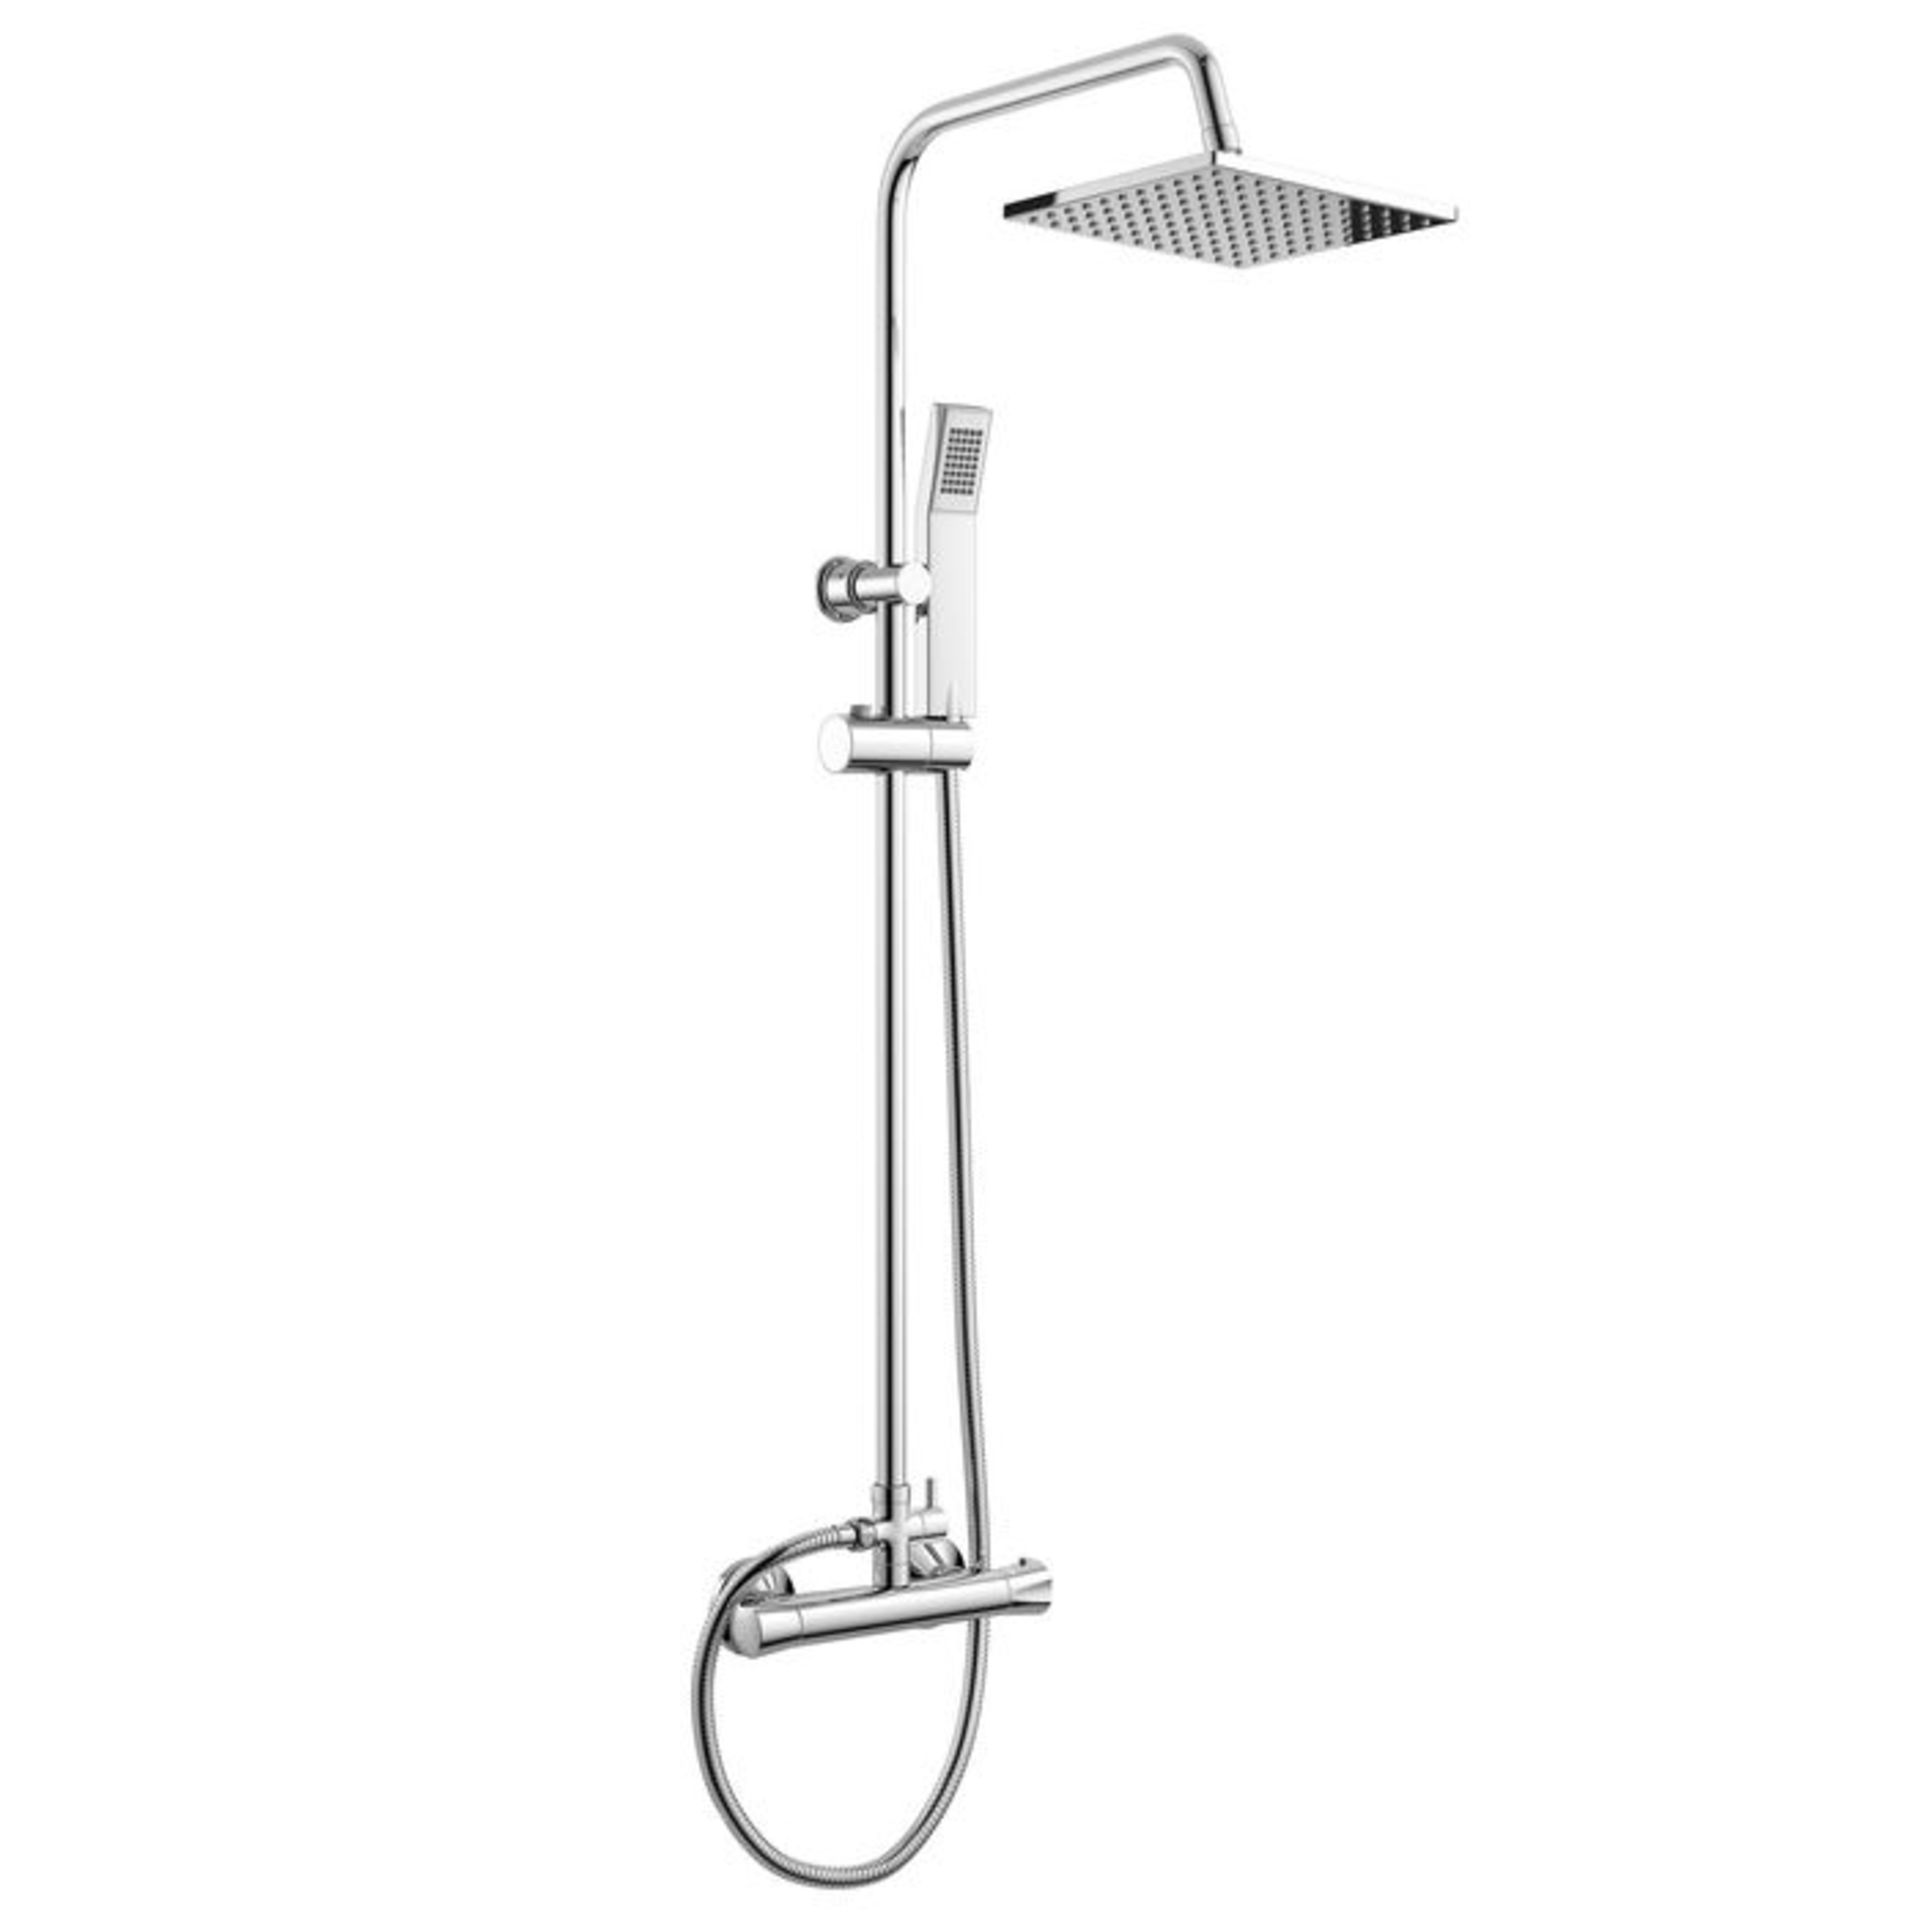 (EY204) Square Exposed Thermostatic Shower Kit & Head. Curved features and contemporary rounded